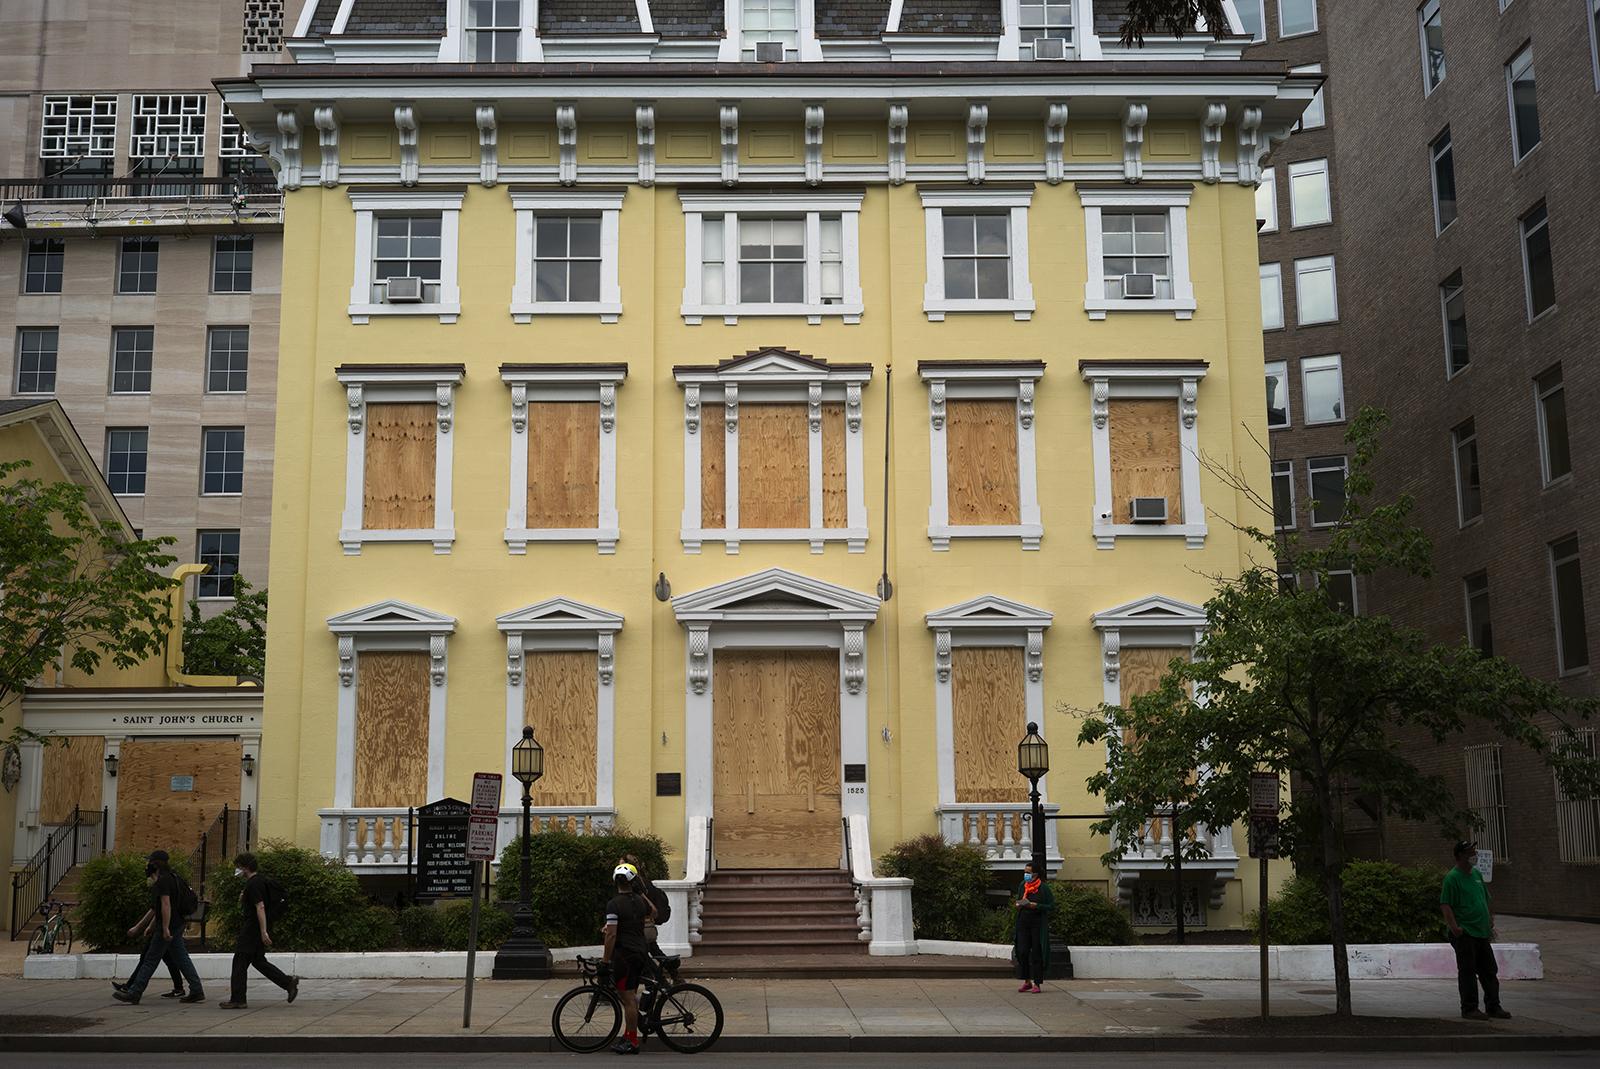 D.C Boarded Up - 